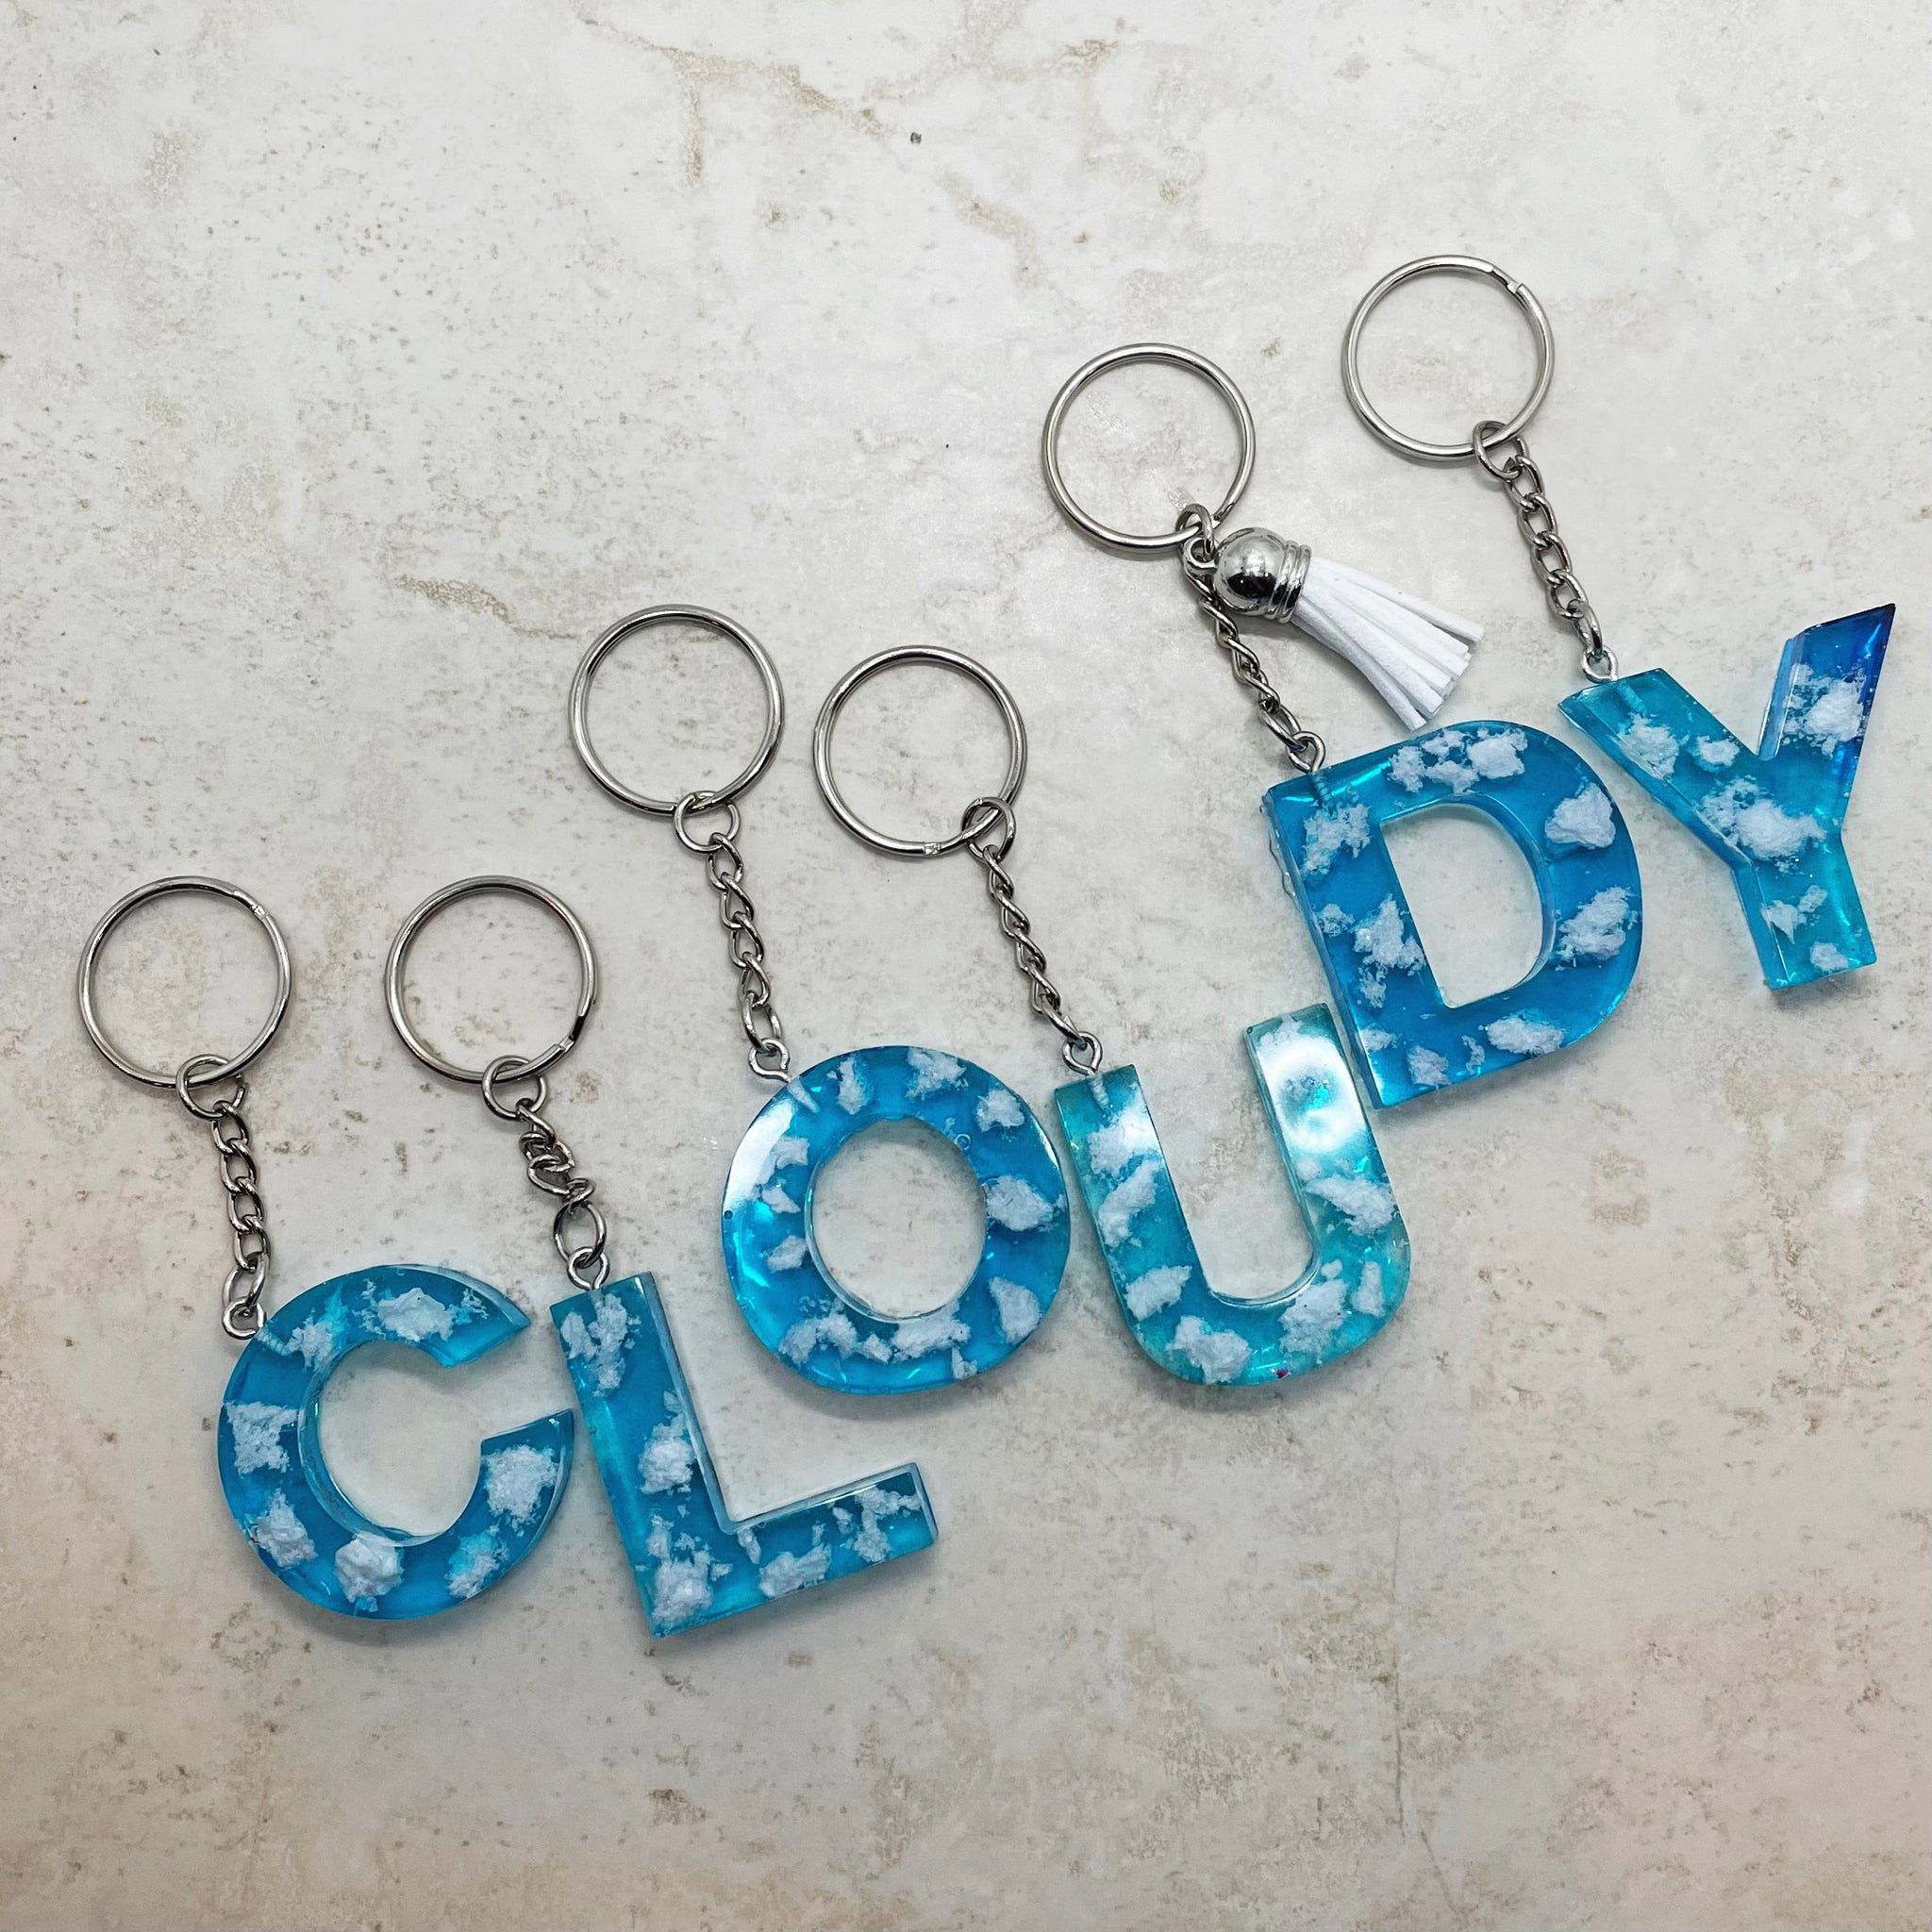 Cloudy Keychains